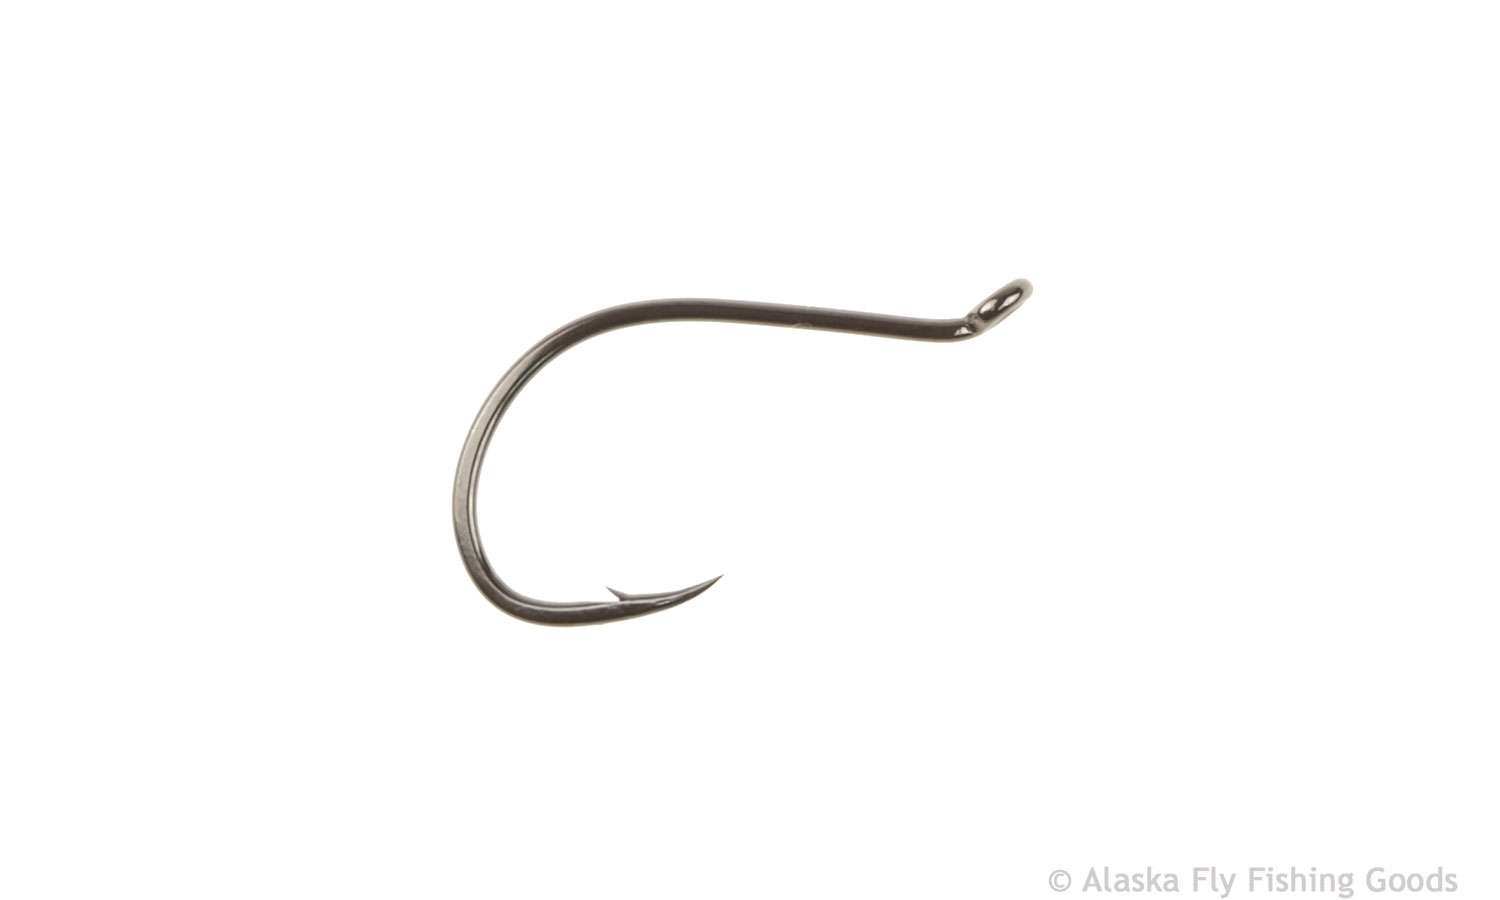 KONA FIshing Products – Fishing Hooks and Accessories for Fly Fishing,  Inshore Fishing, Offshore Fishing